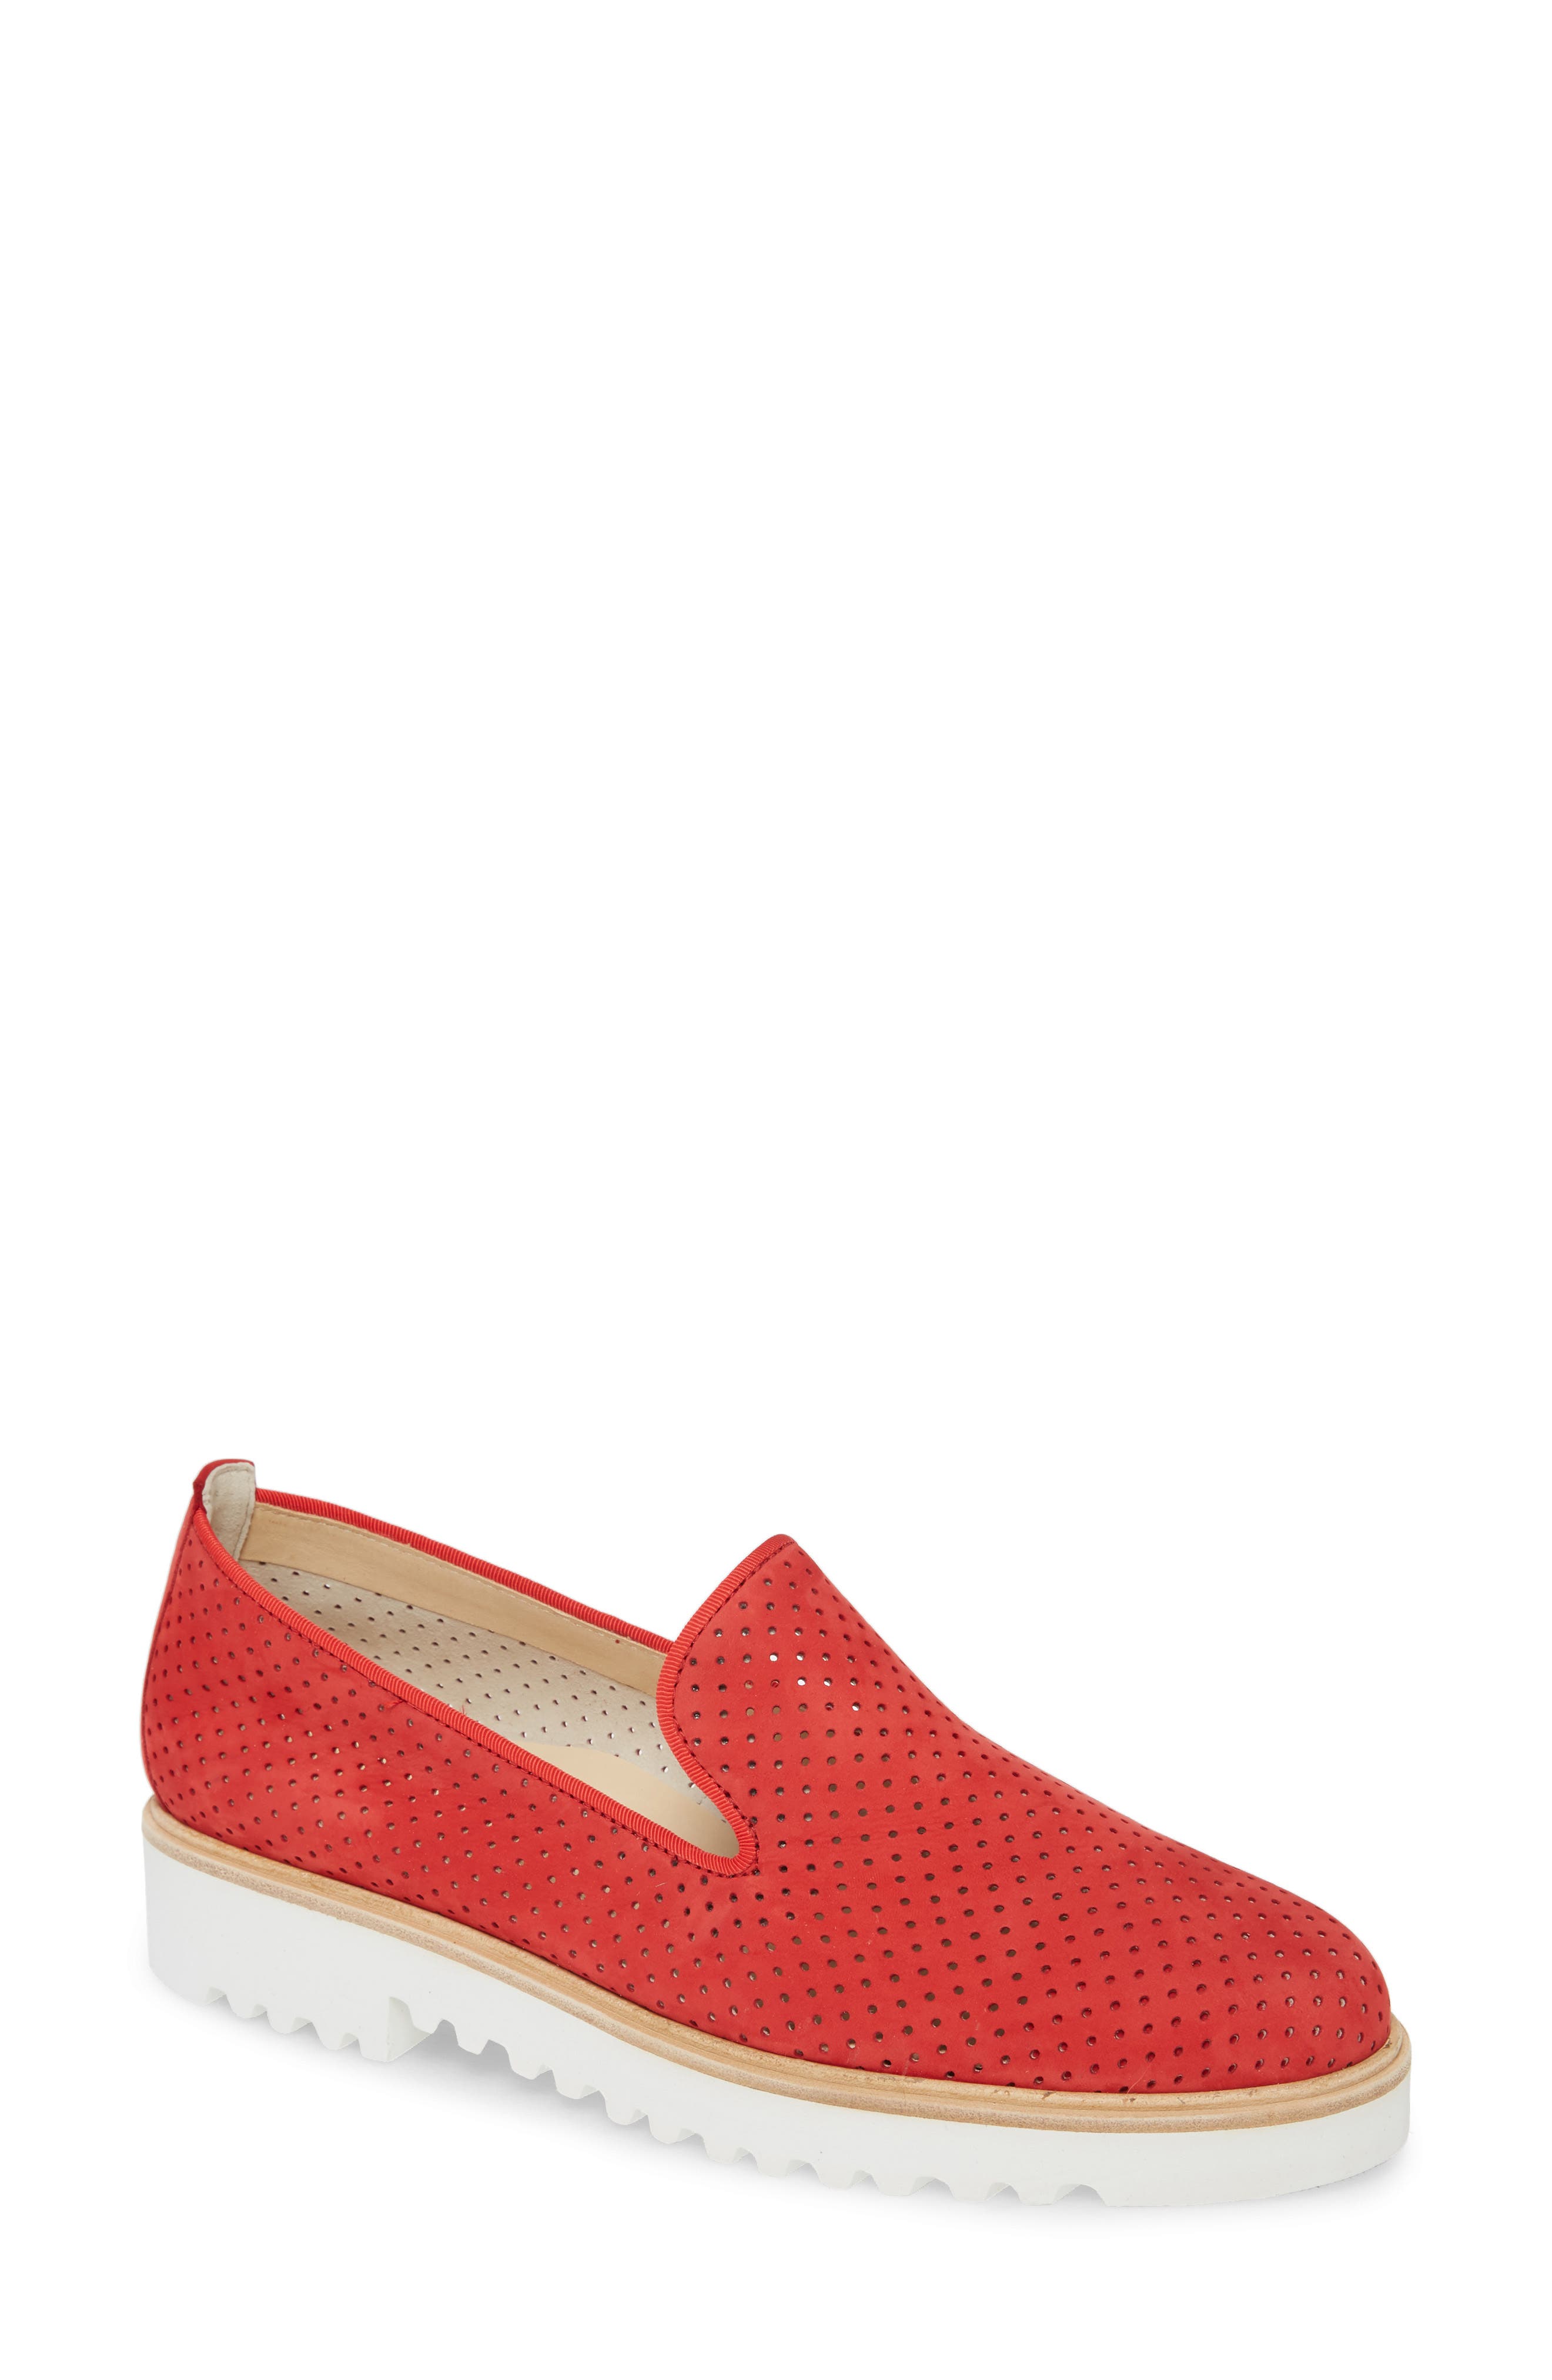 Paul Green | Cailey Perforated Loafer 